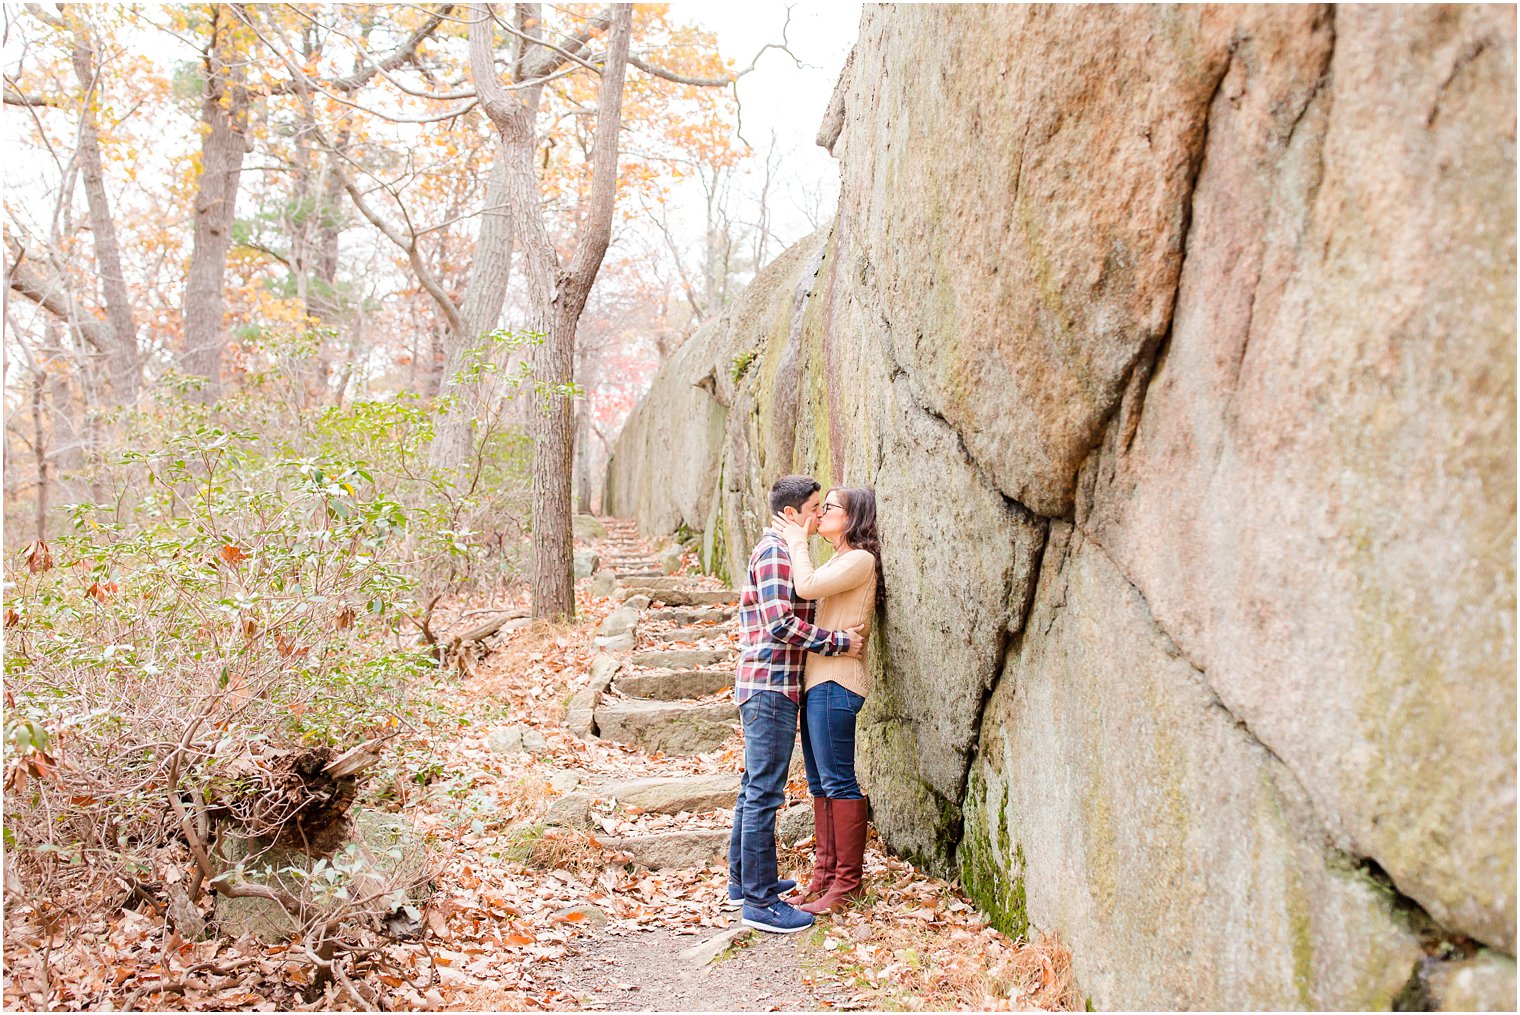 Woodsy engagement photos in NY state